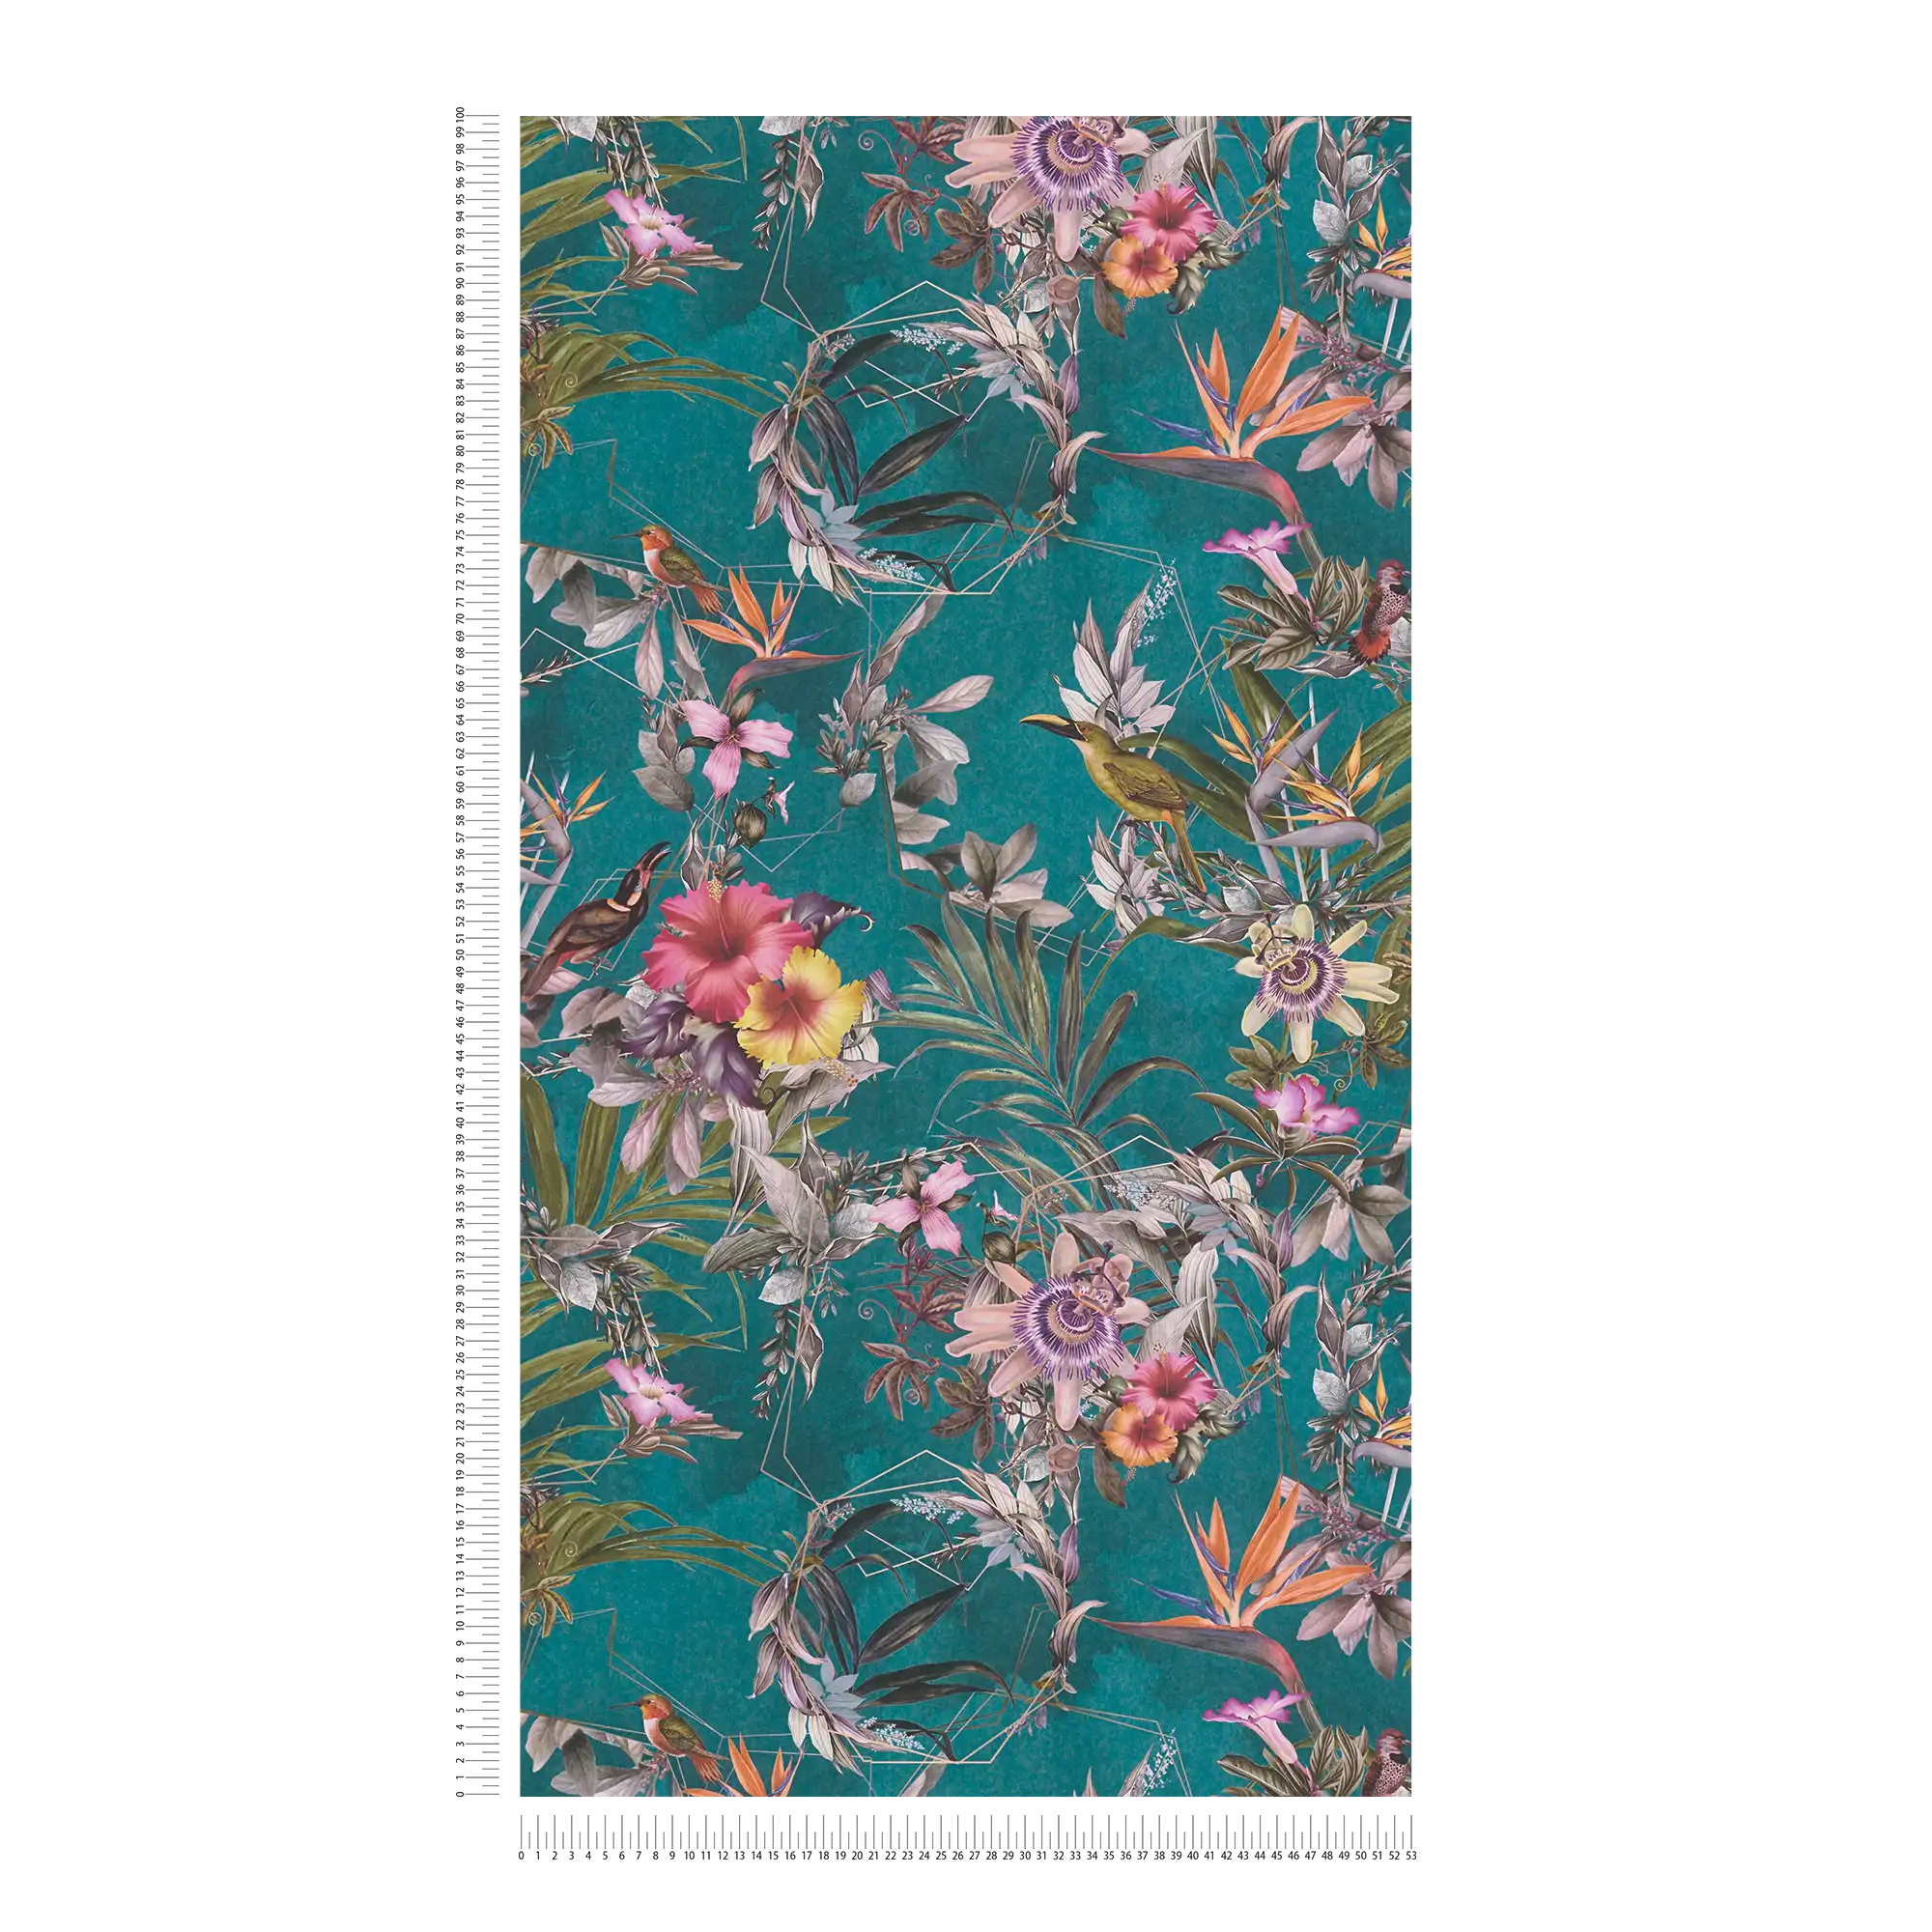             Jungle wallpaper tropical flowers & birds - turquoise, green, colourful
        